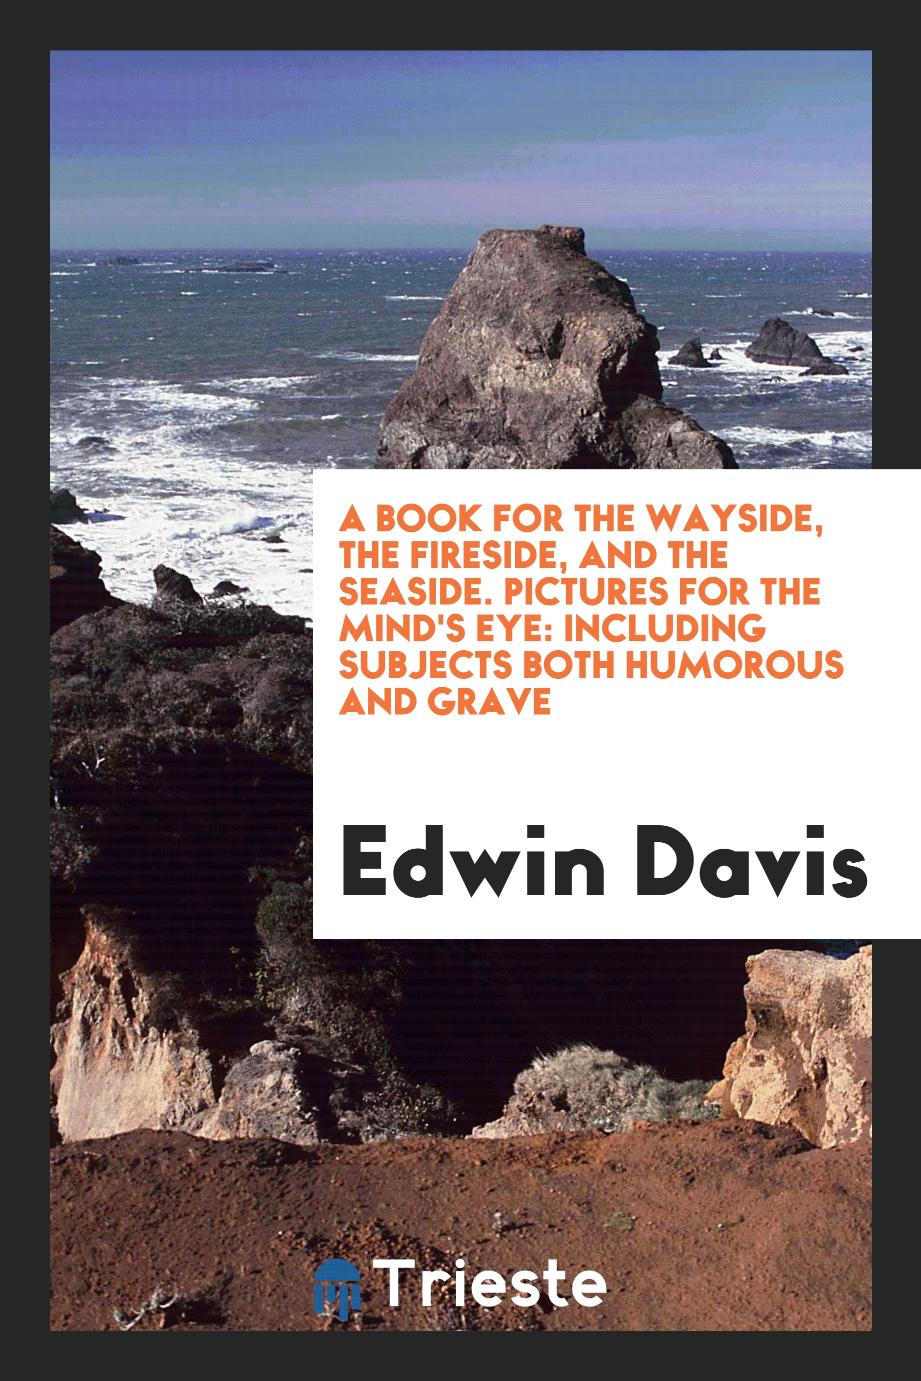 A Book for the Wayside, the Fireside, and the Seaside. Pictures for the Mind's Eye: Including Subjects Both Humorous and Grave